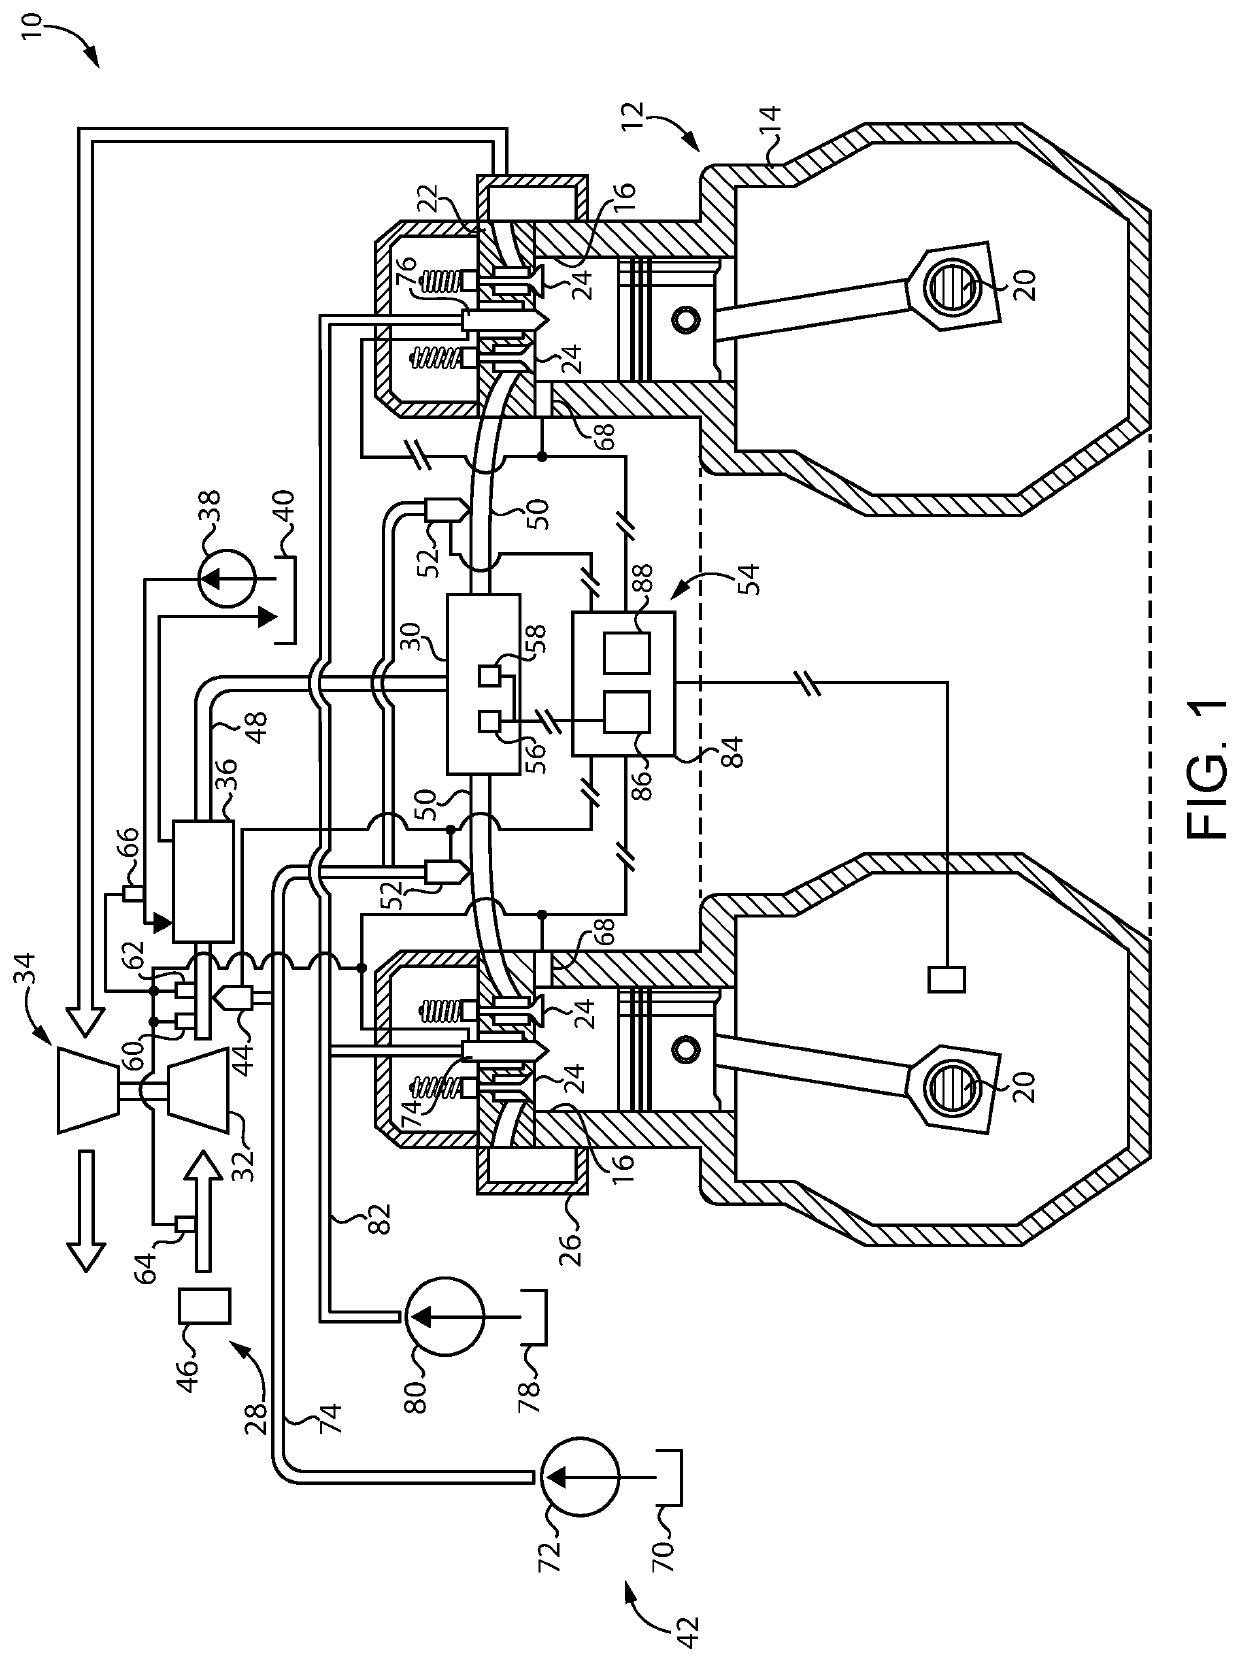 Engine system operating strategy apportioning fuel injection between upstream and downstream injection locations